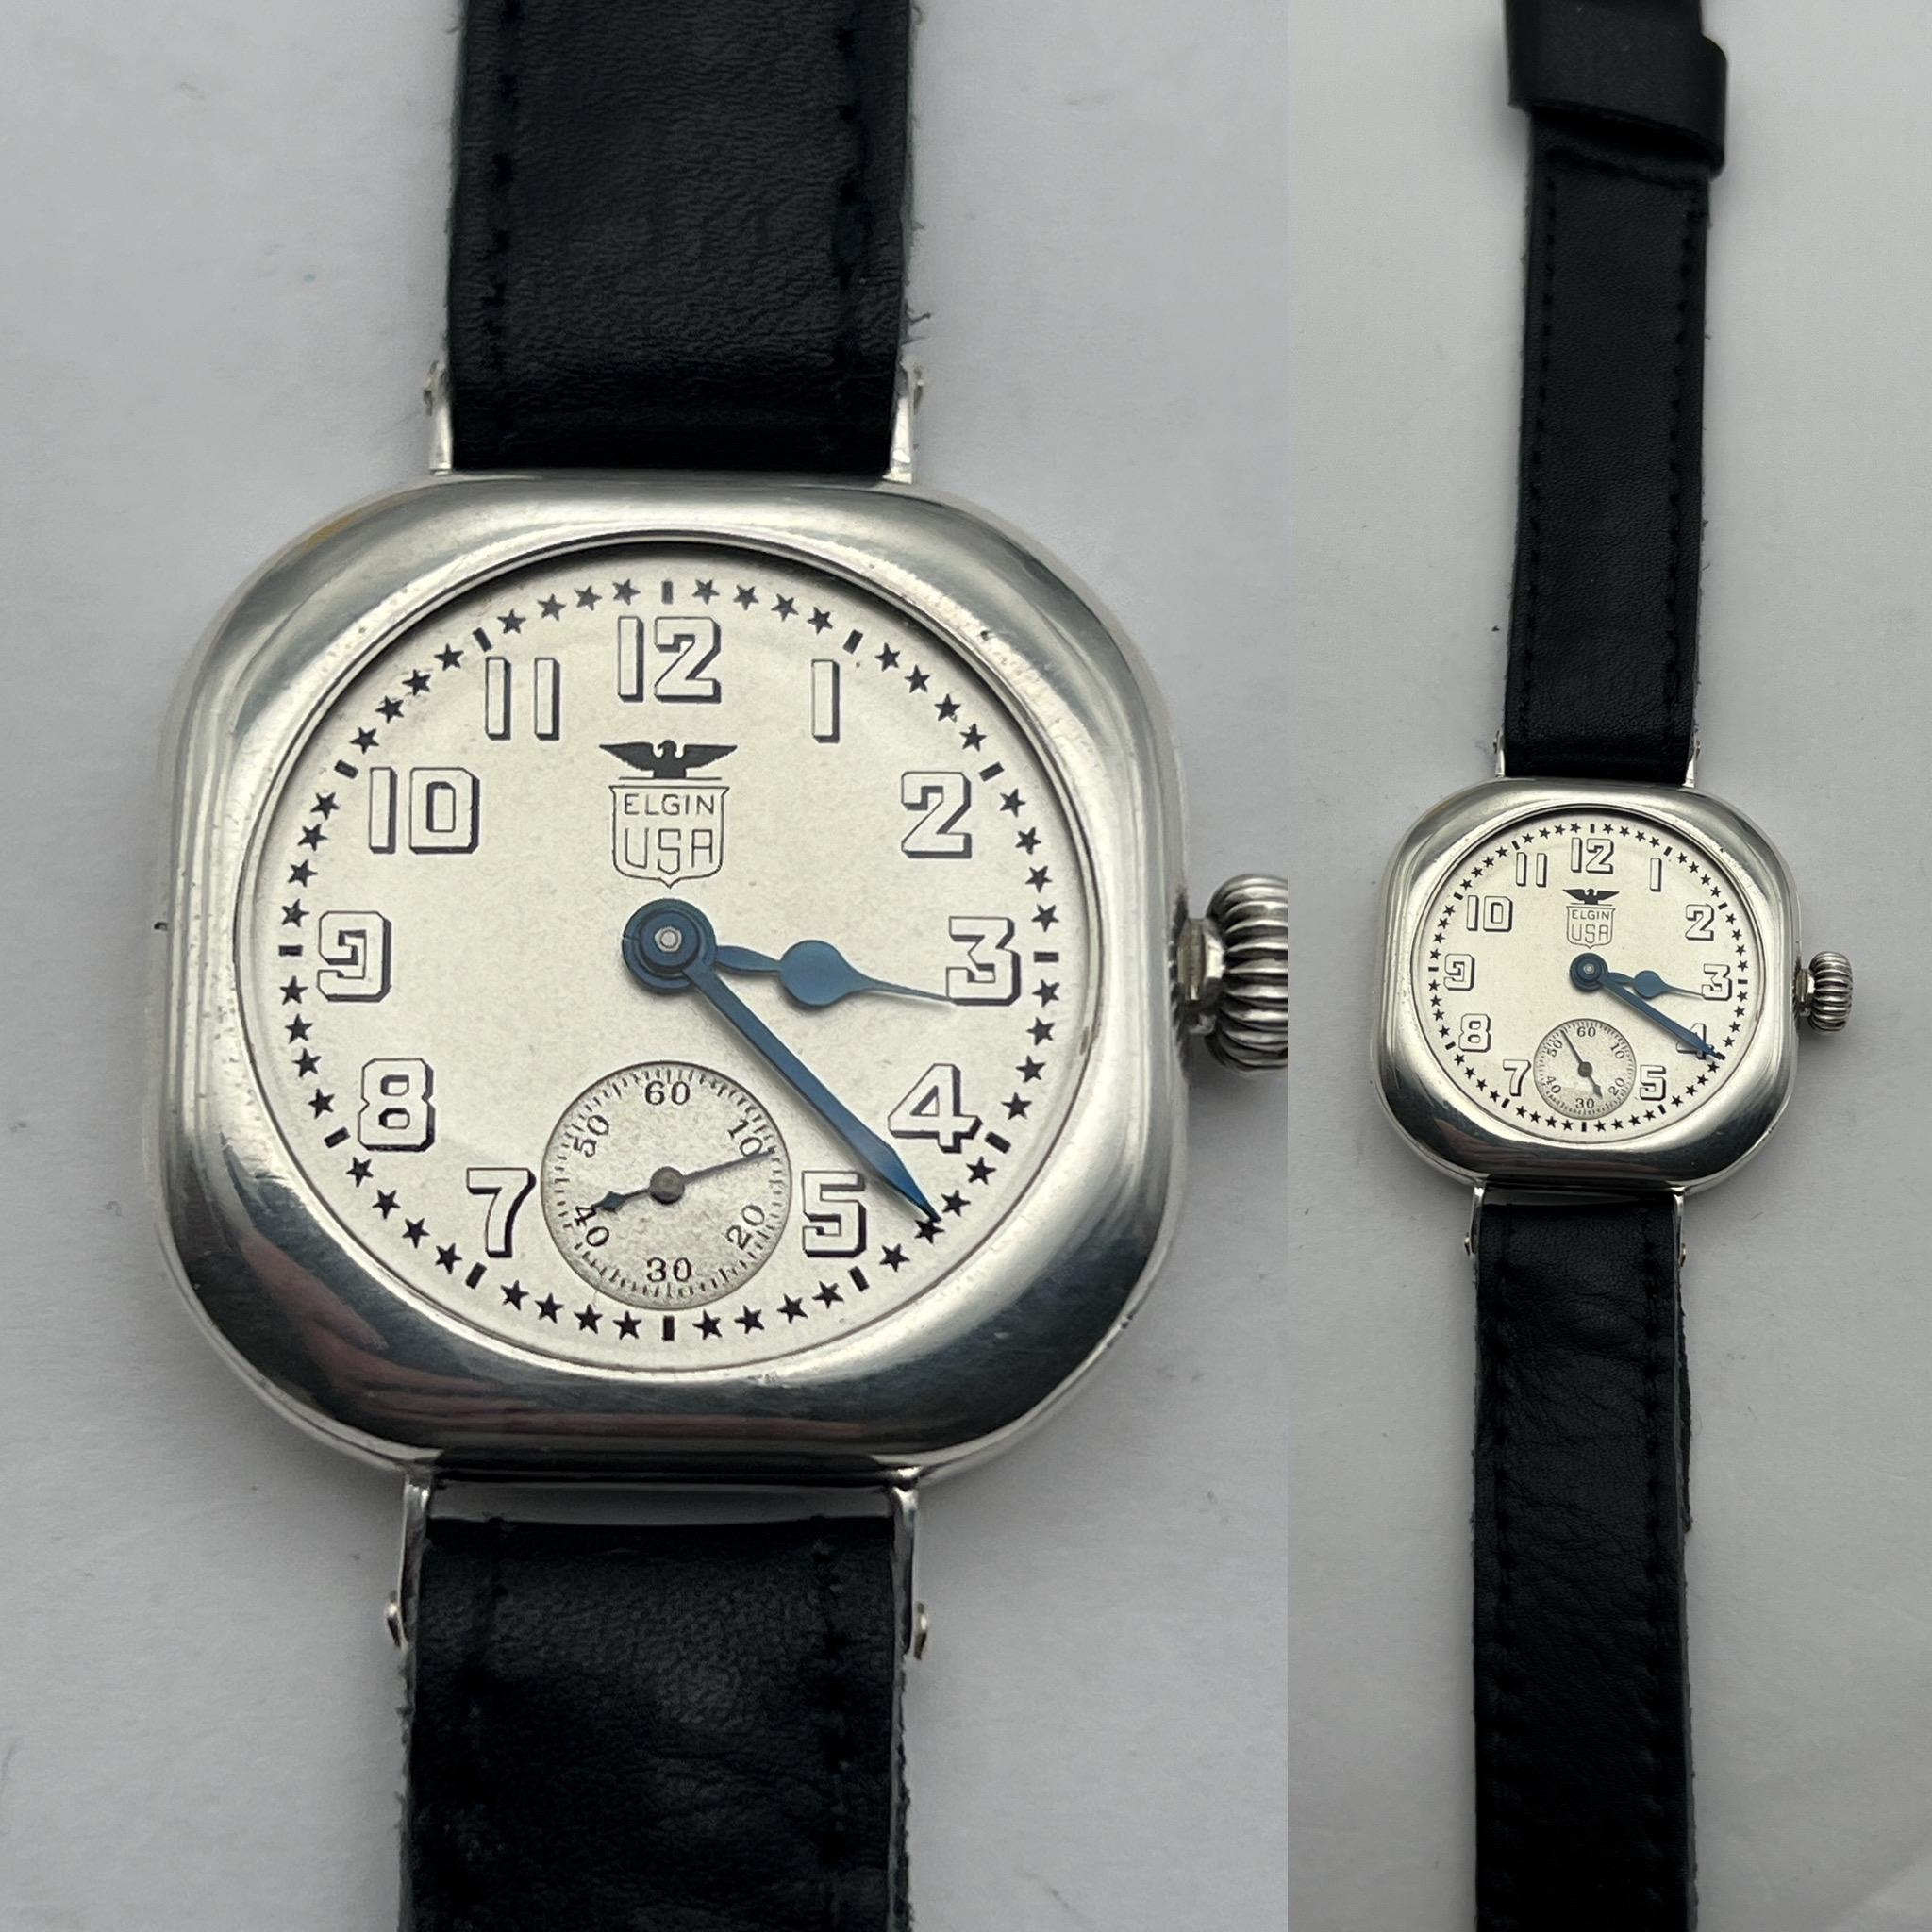  1918 WW1 / Trench Watch Elgin Rare White Star Dial 